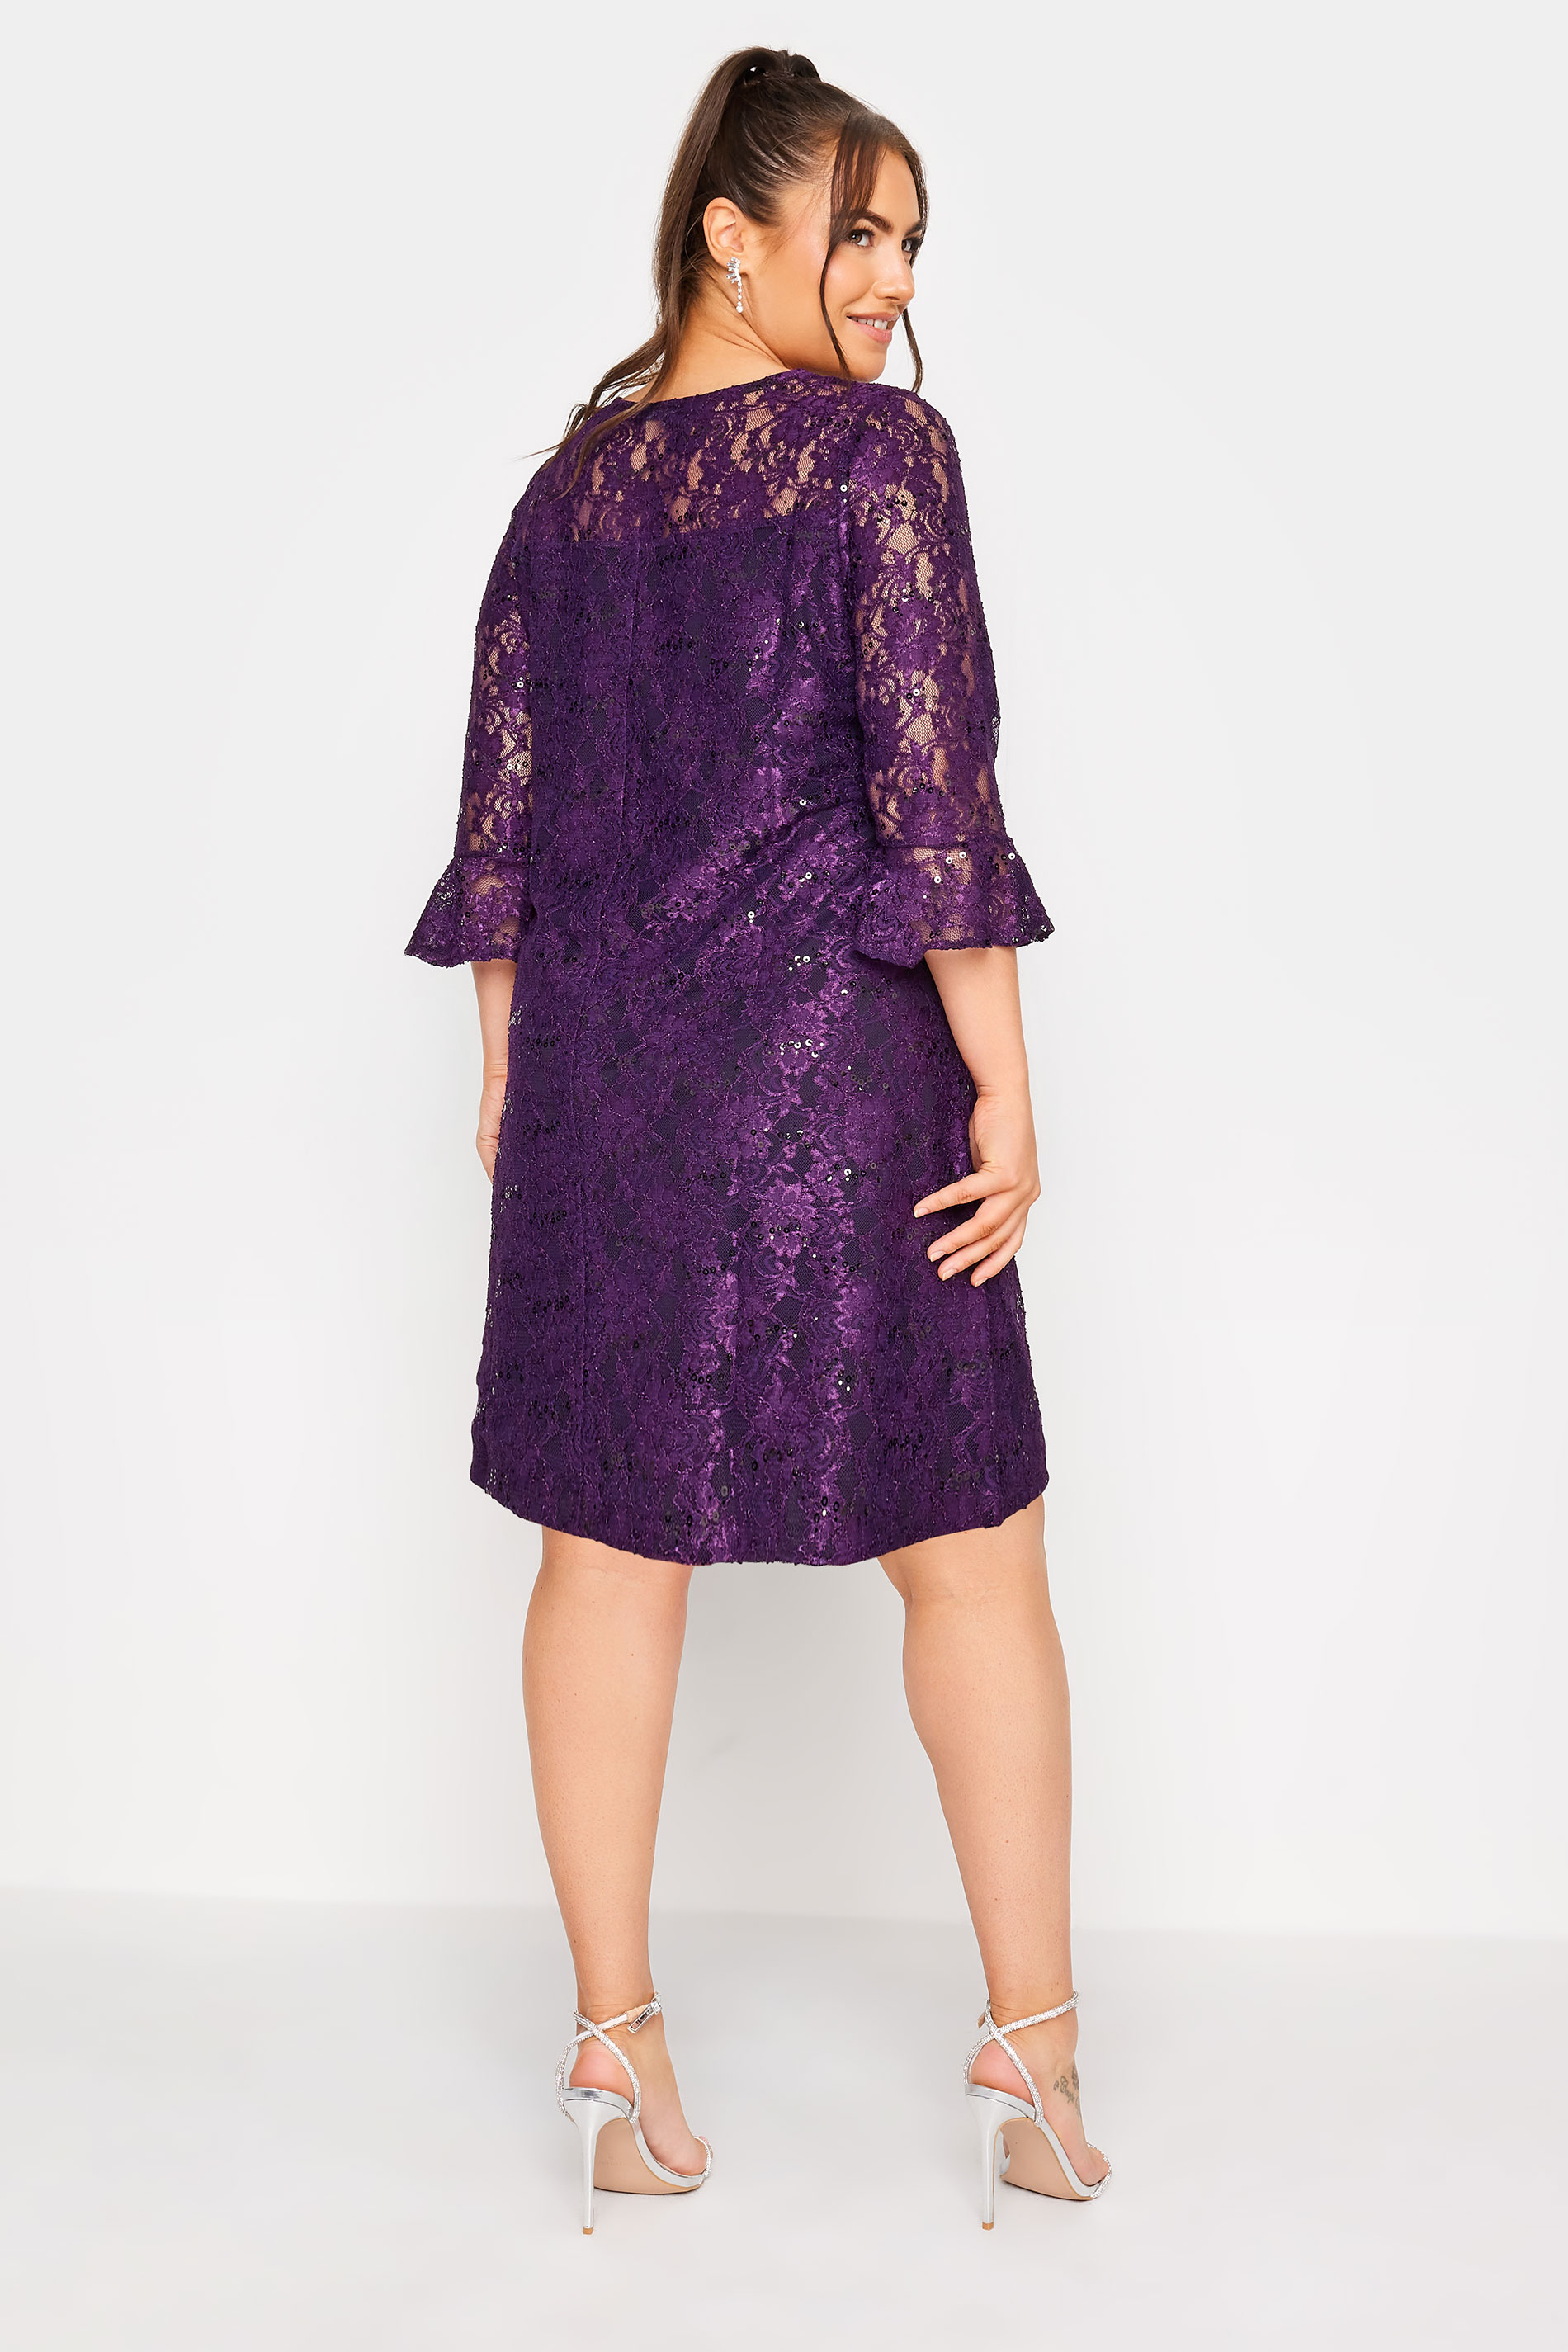 YOURS Plus Size Purple Lace Sequin Embellished Swing Dress | Yours Clothing 3